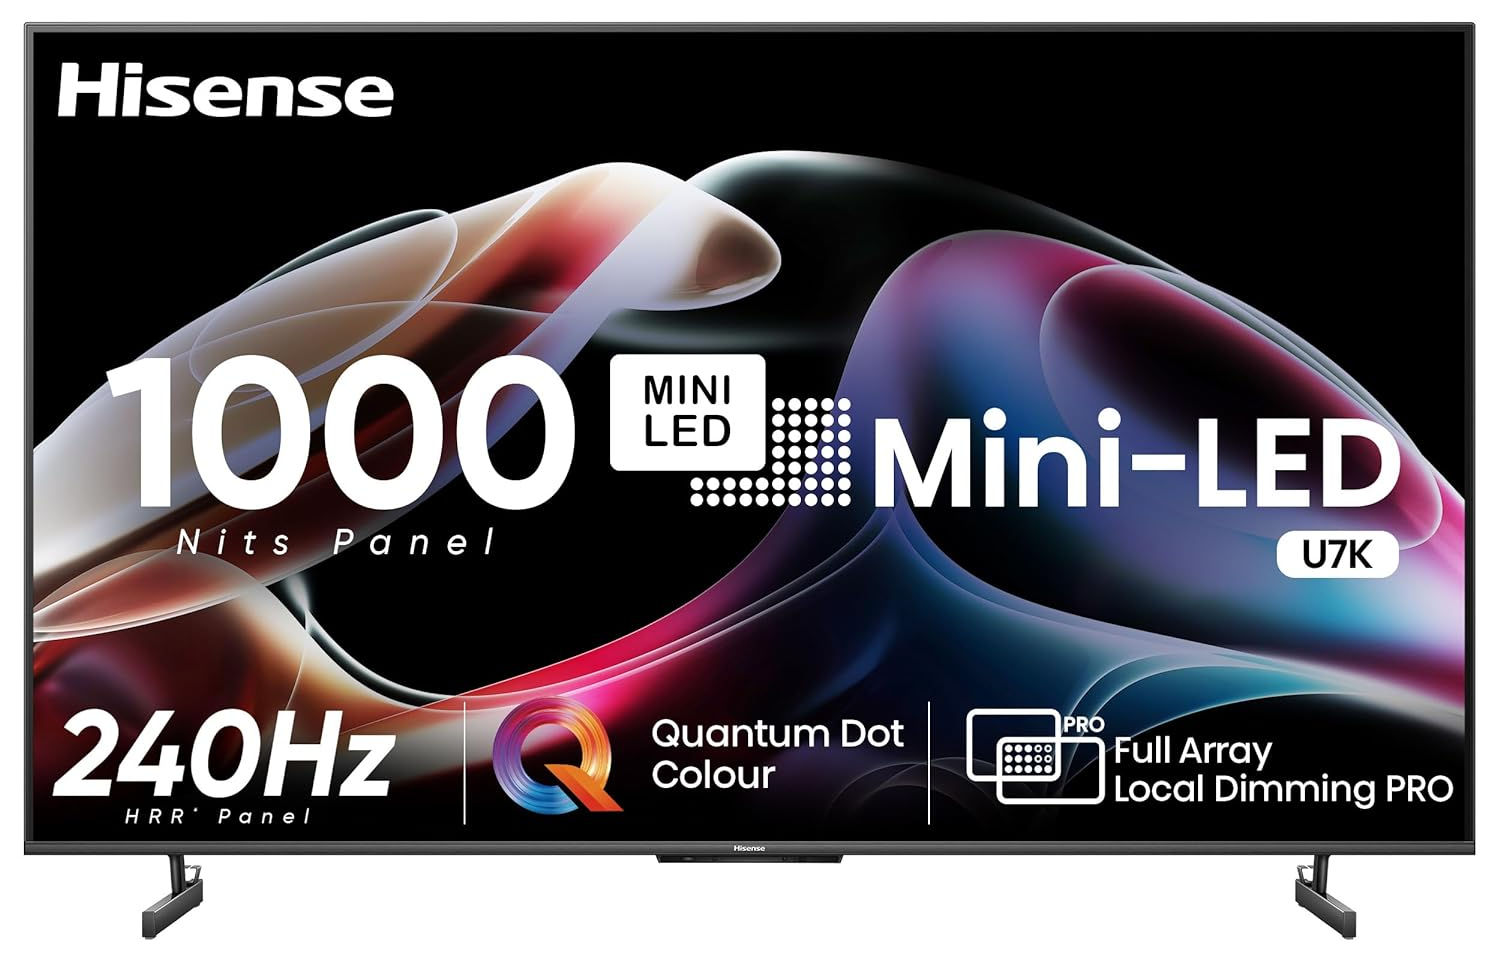 HISENSE U6K: HOW TO ENABLE ENHANCED HDMI FORMAT FOR GAMING WITH